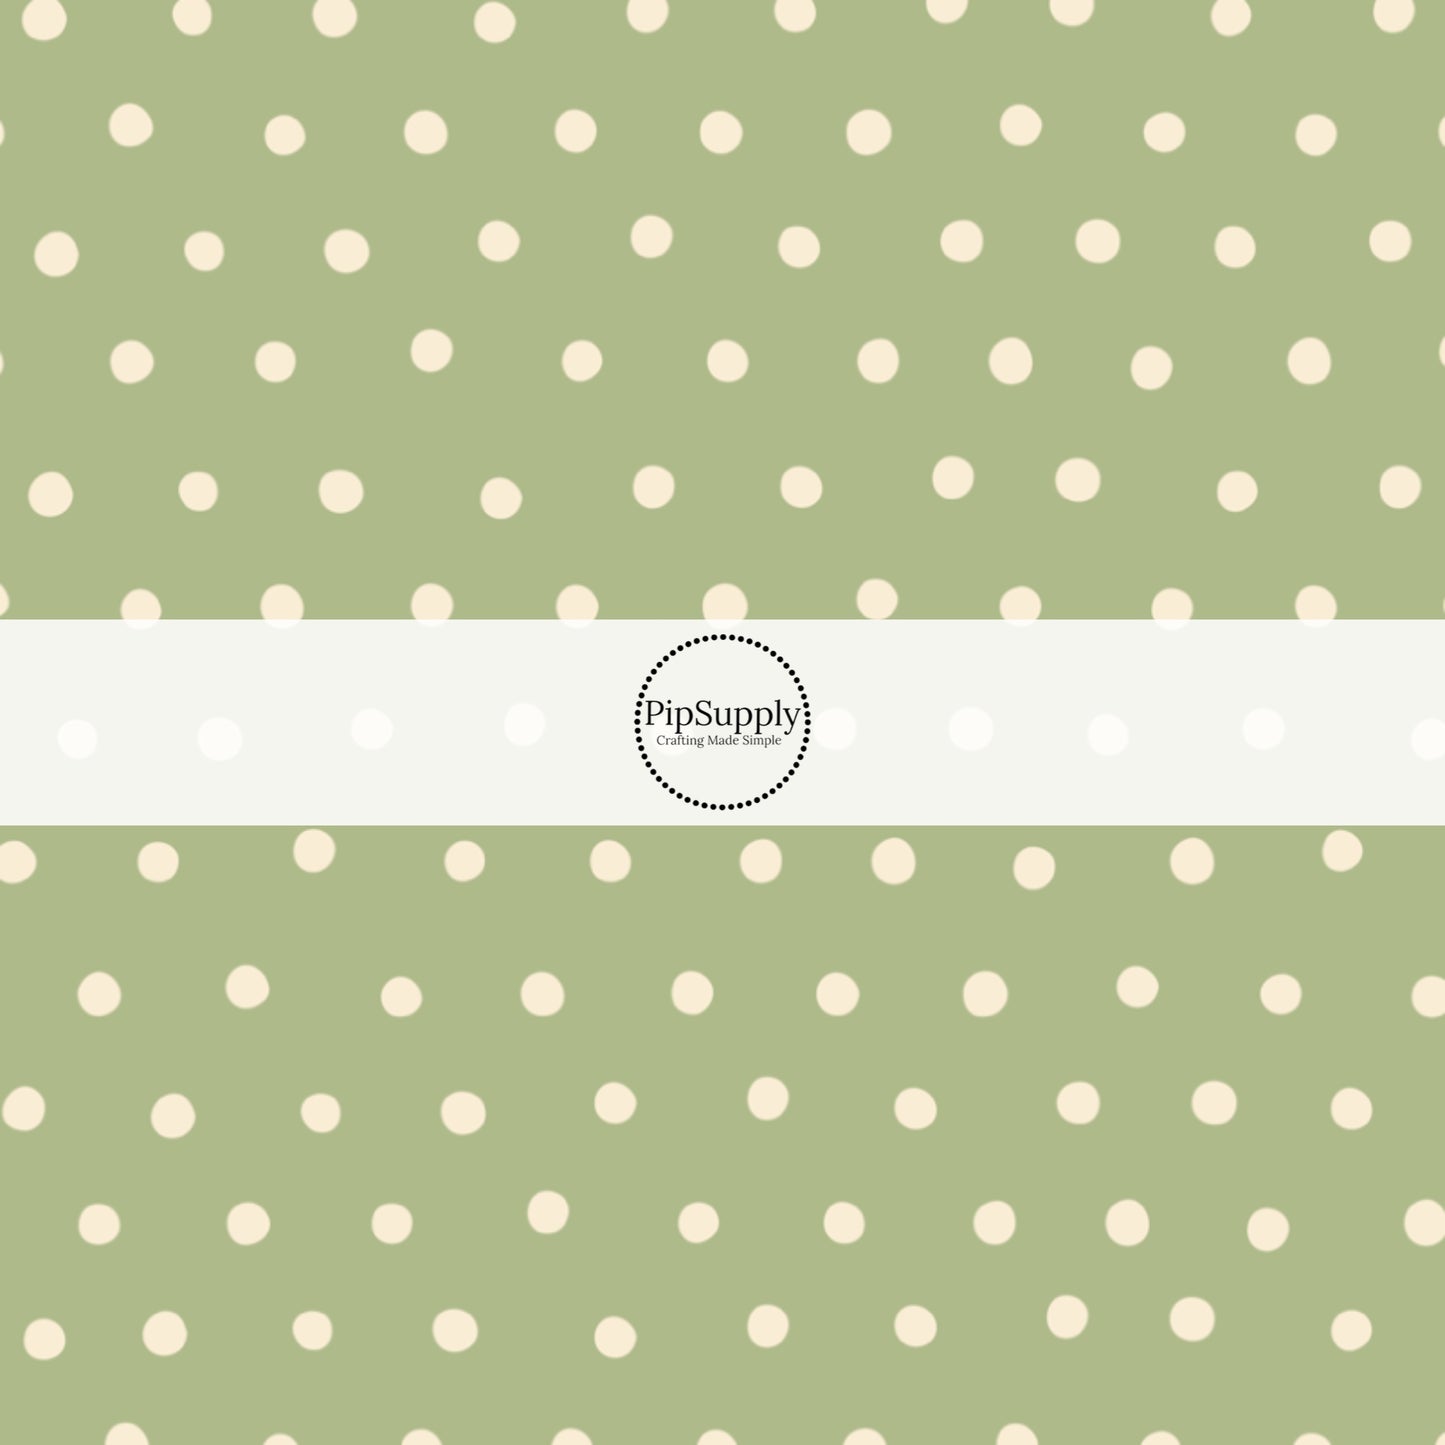 Cream Dots on Sage Green Fabric by the Yard.